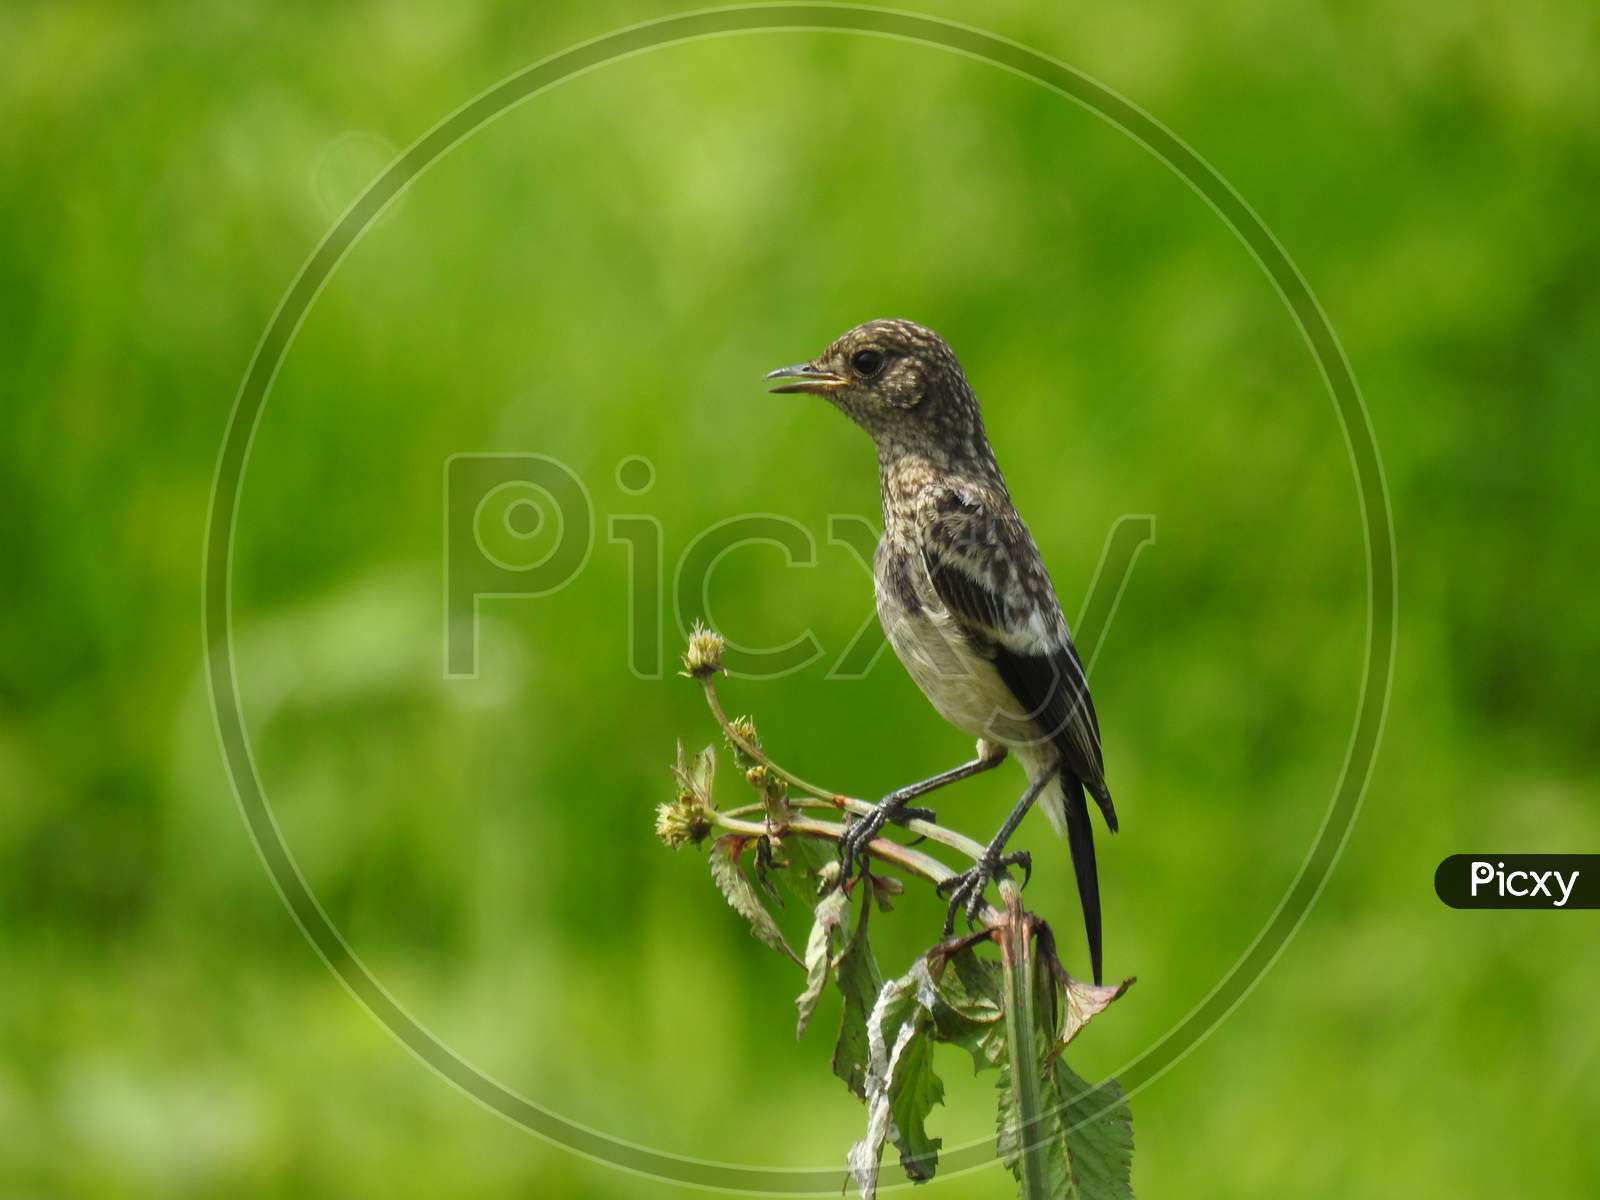 Bird (Pied Bushchat juvenile) sitting on the grass in agricultural field